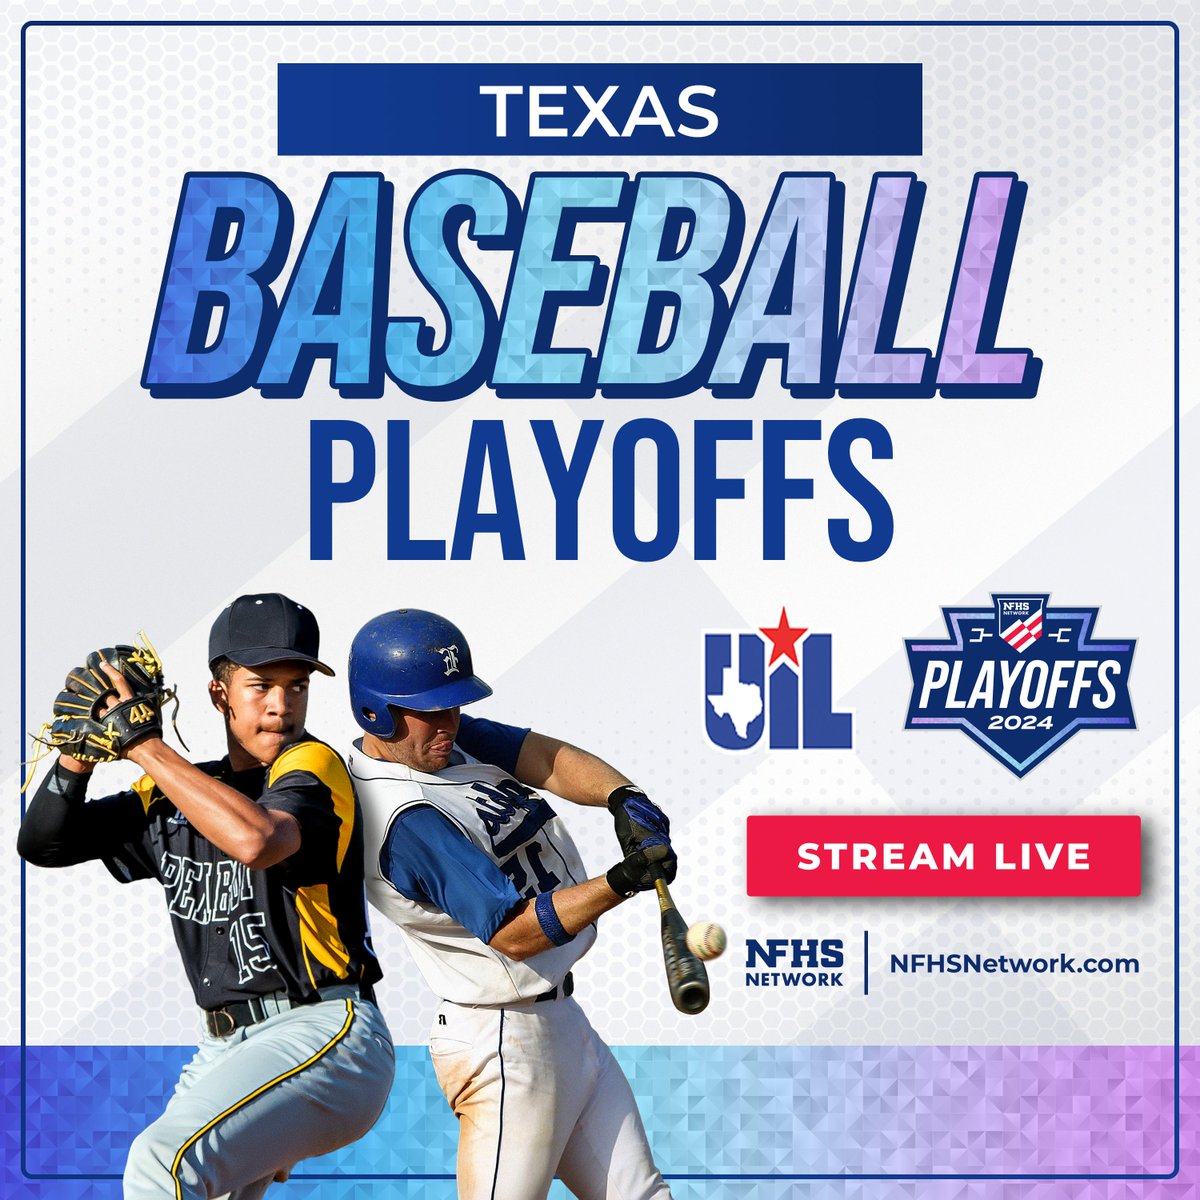 @uiltexas Can't make it out in person? Watch the 2024 UIL Baseball Playoffs on the #NFHSNetwork today! ⚾️ Stream live through the OFFICIAL link here: bit.ly/47mYZrC ✅